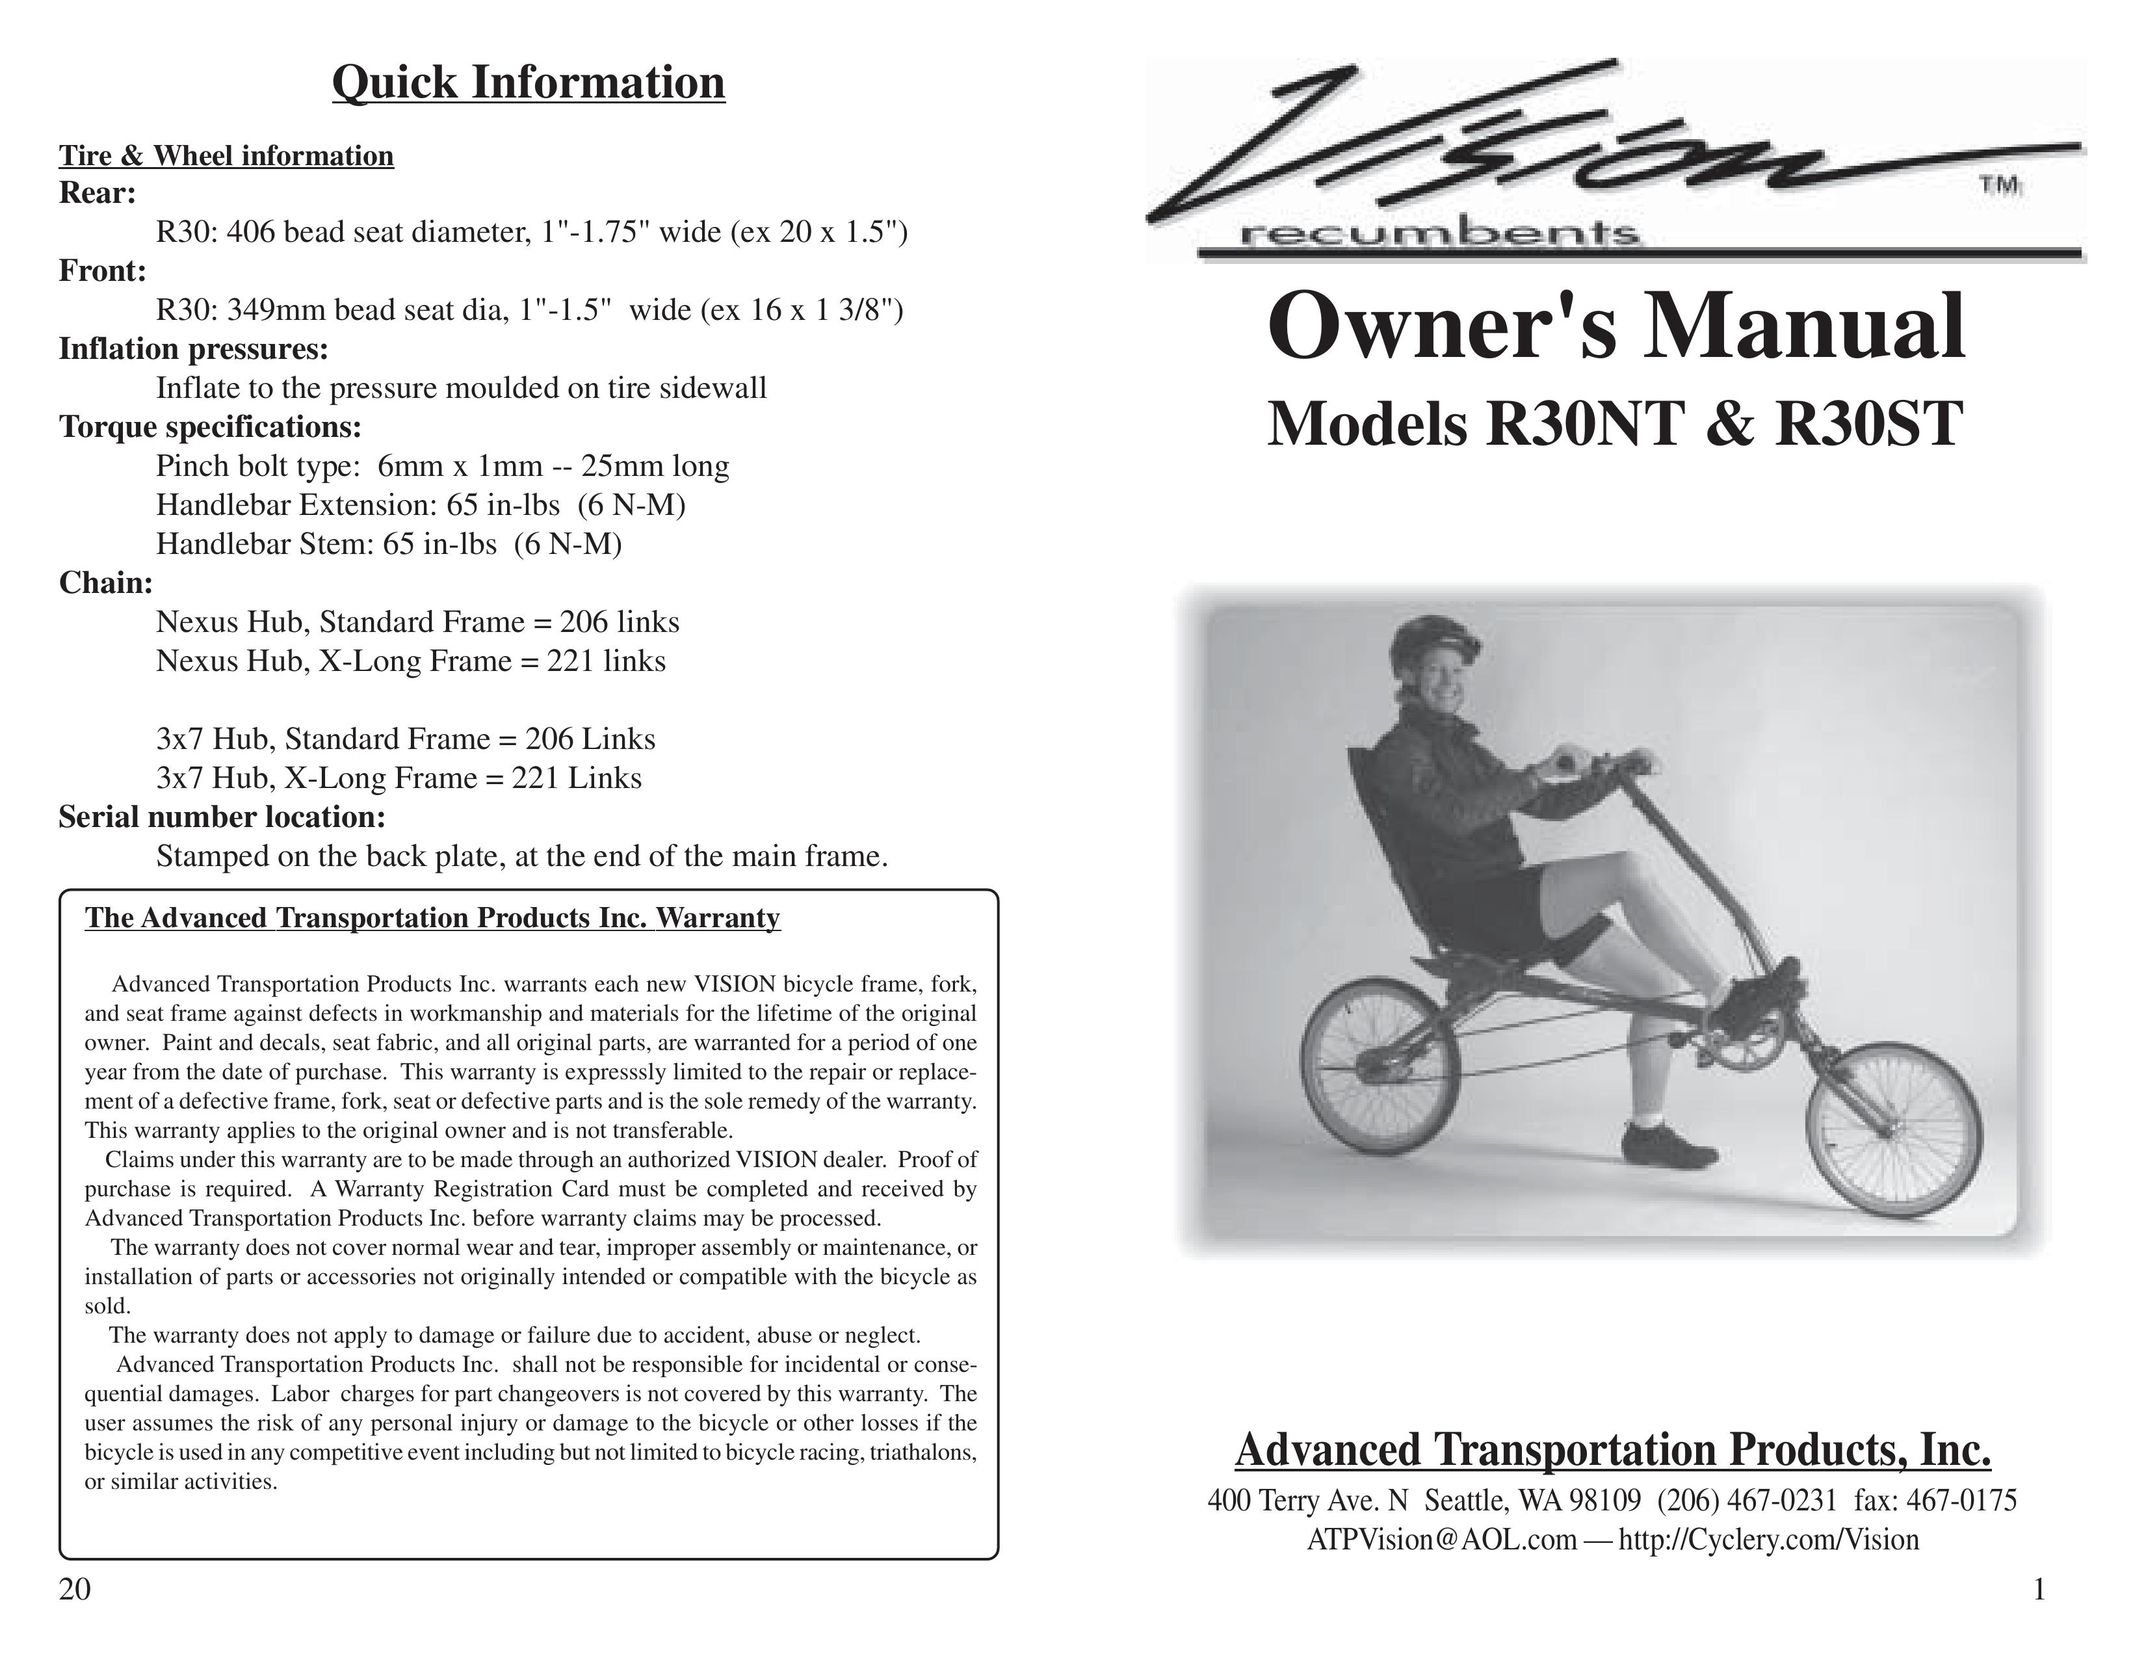 Diamond Power Products R30NT Bicycle User Manual (Page 1)